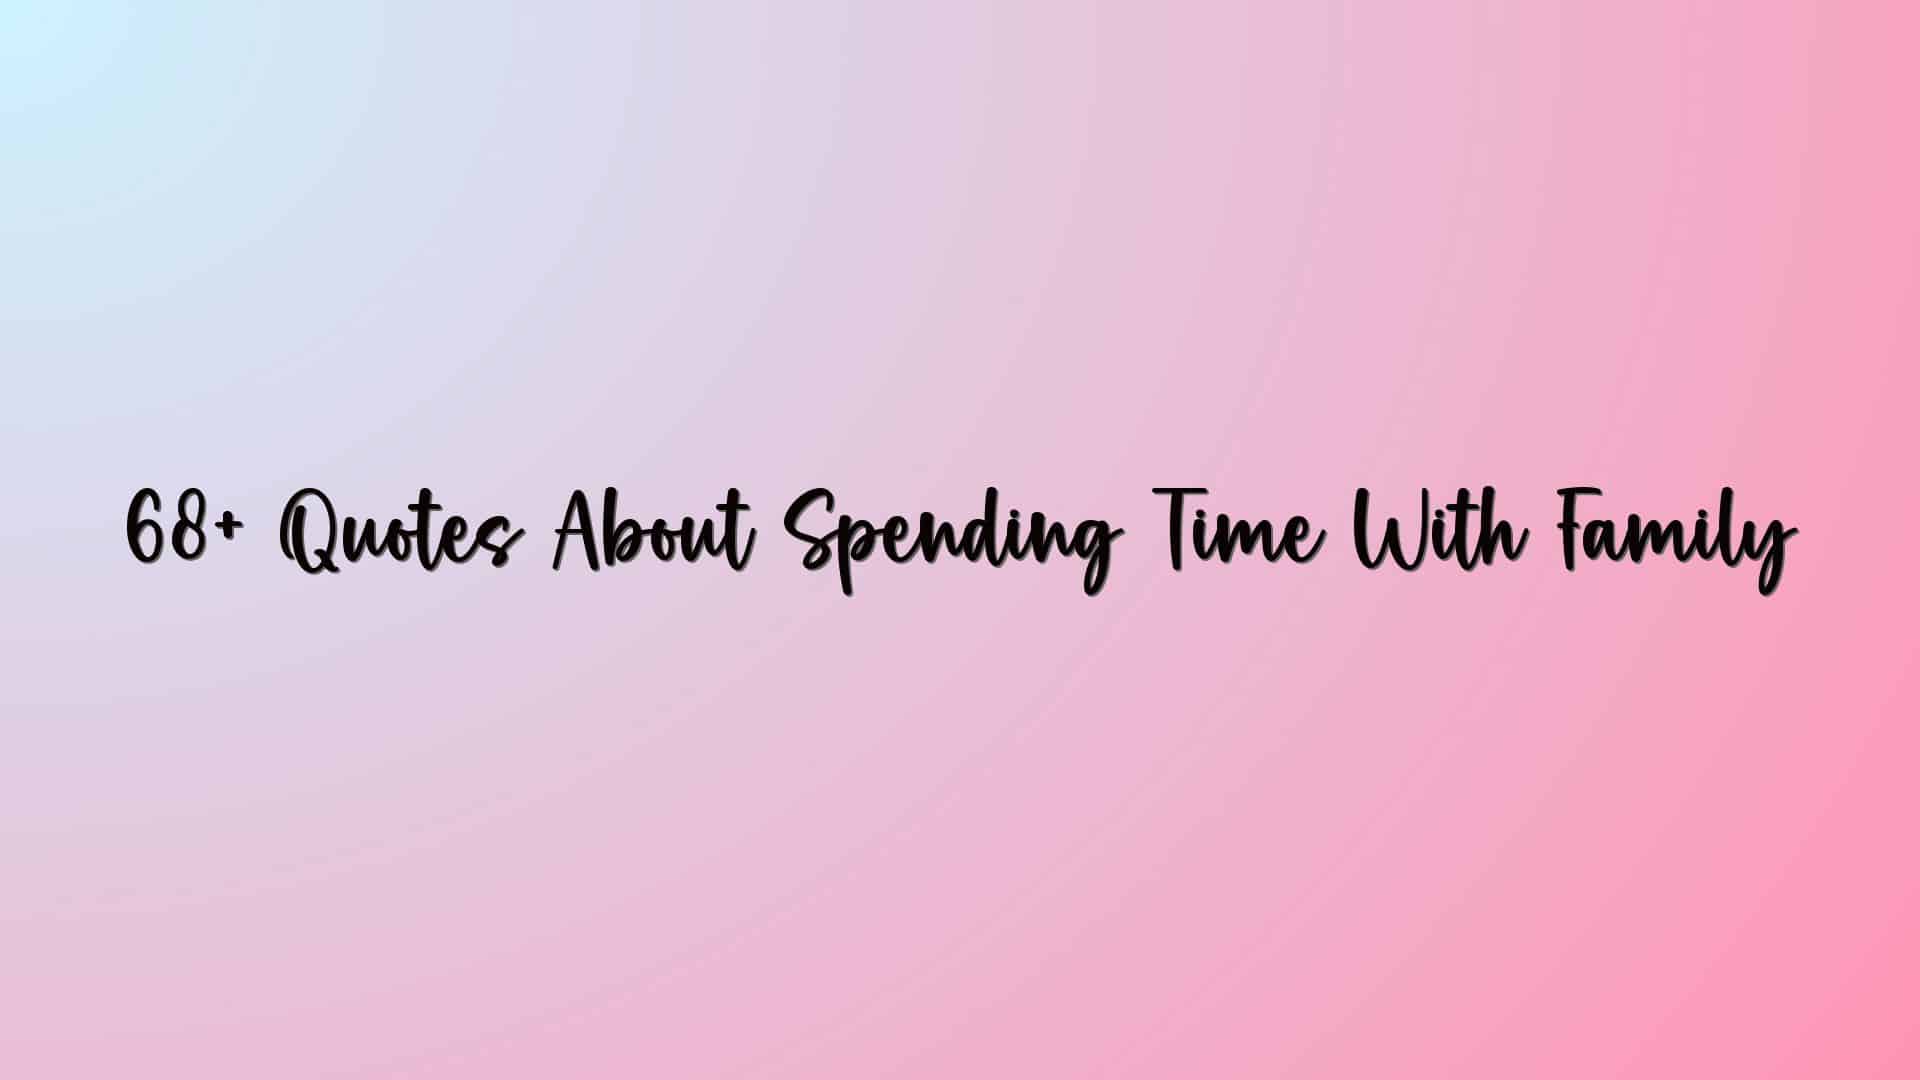 68+ Quotes About Spending Time With Family